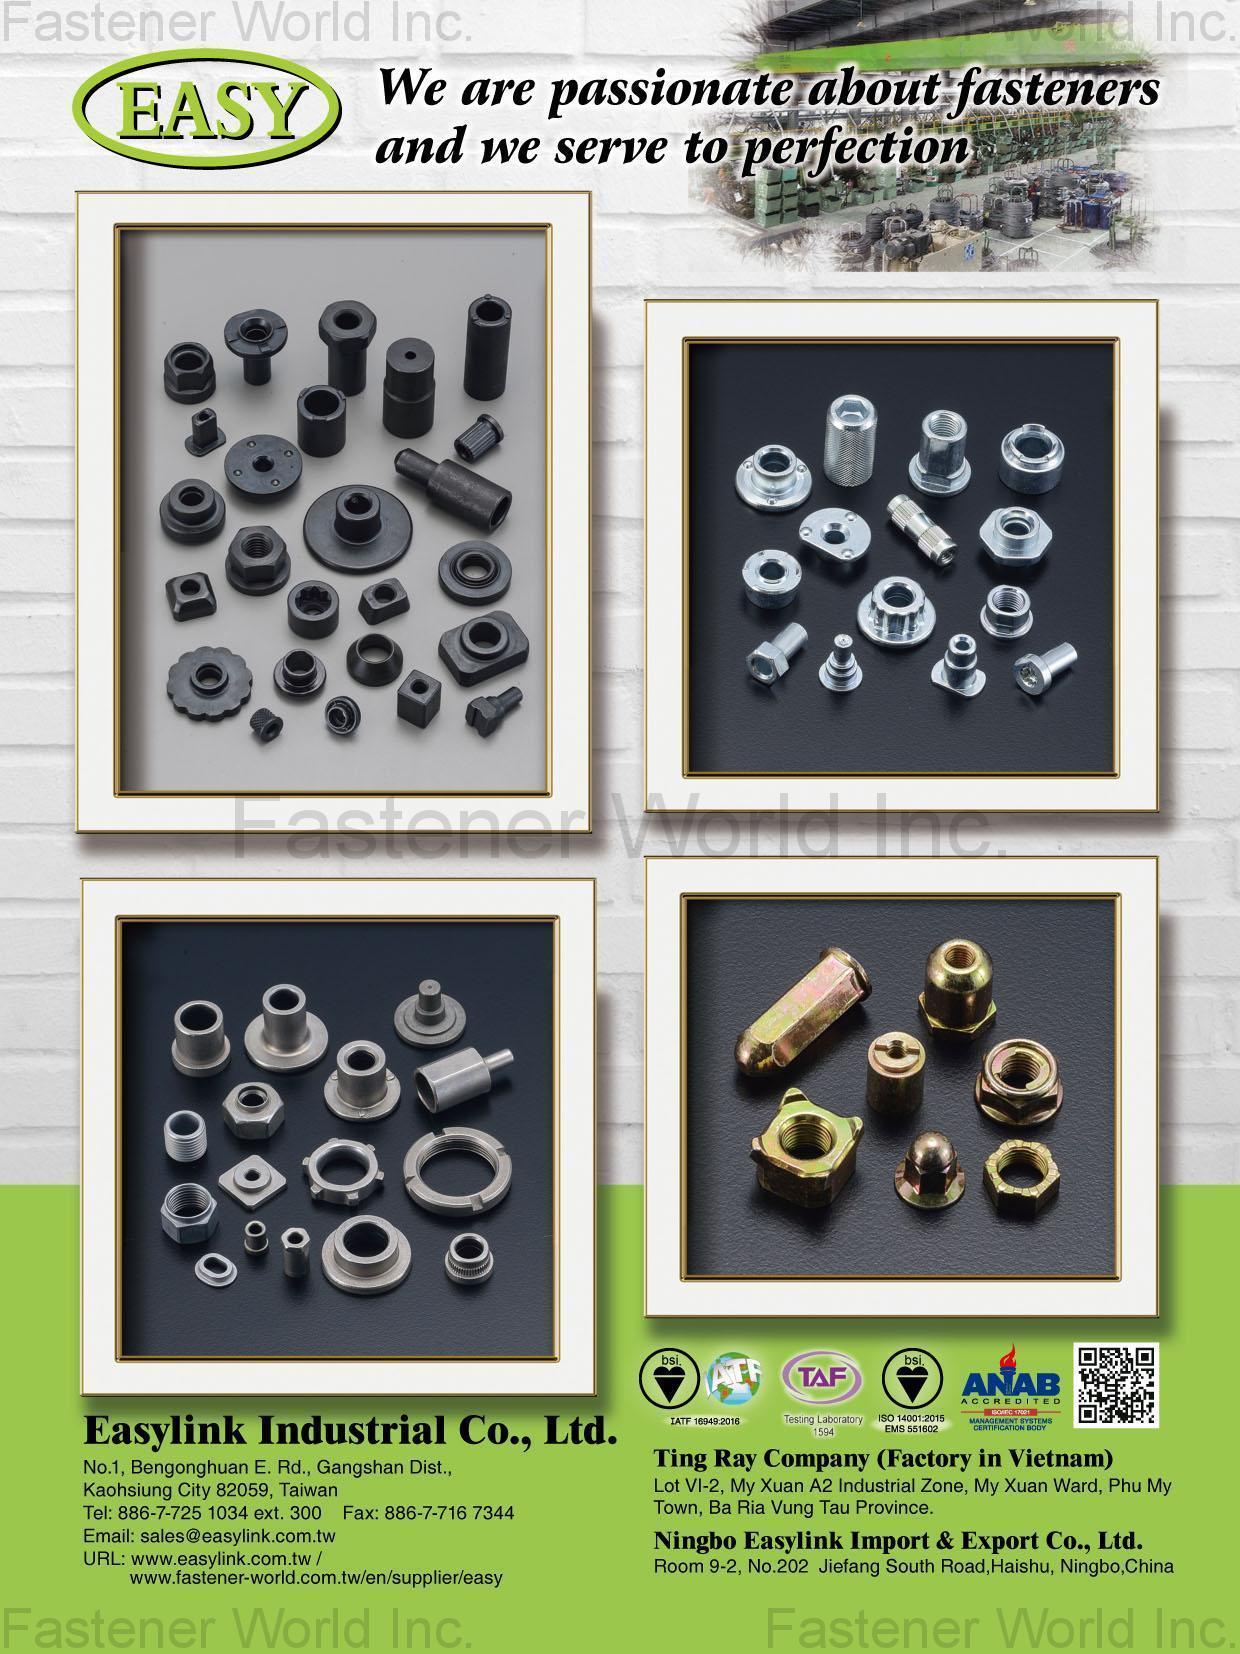 EASYLINK INDUSTRIAL CO., LTD. , Automotive Part, Electronic Screw, Standard Parts, Furniture Components , All Kinds Of Nuts